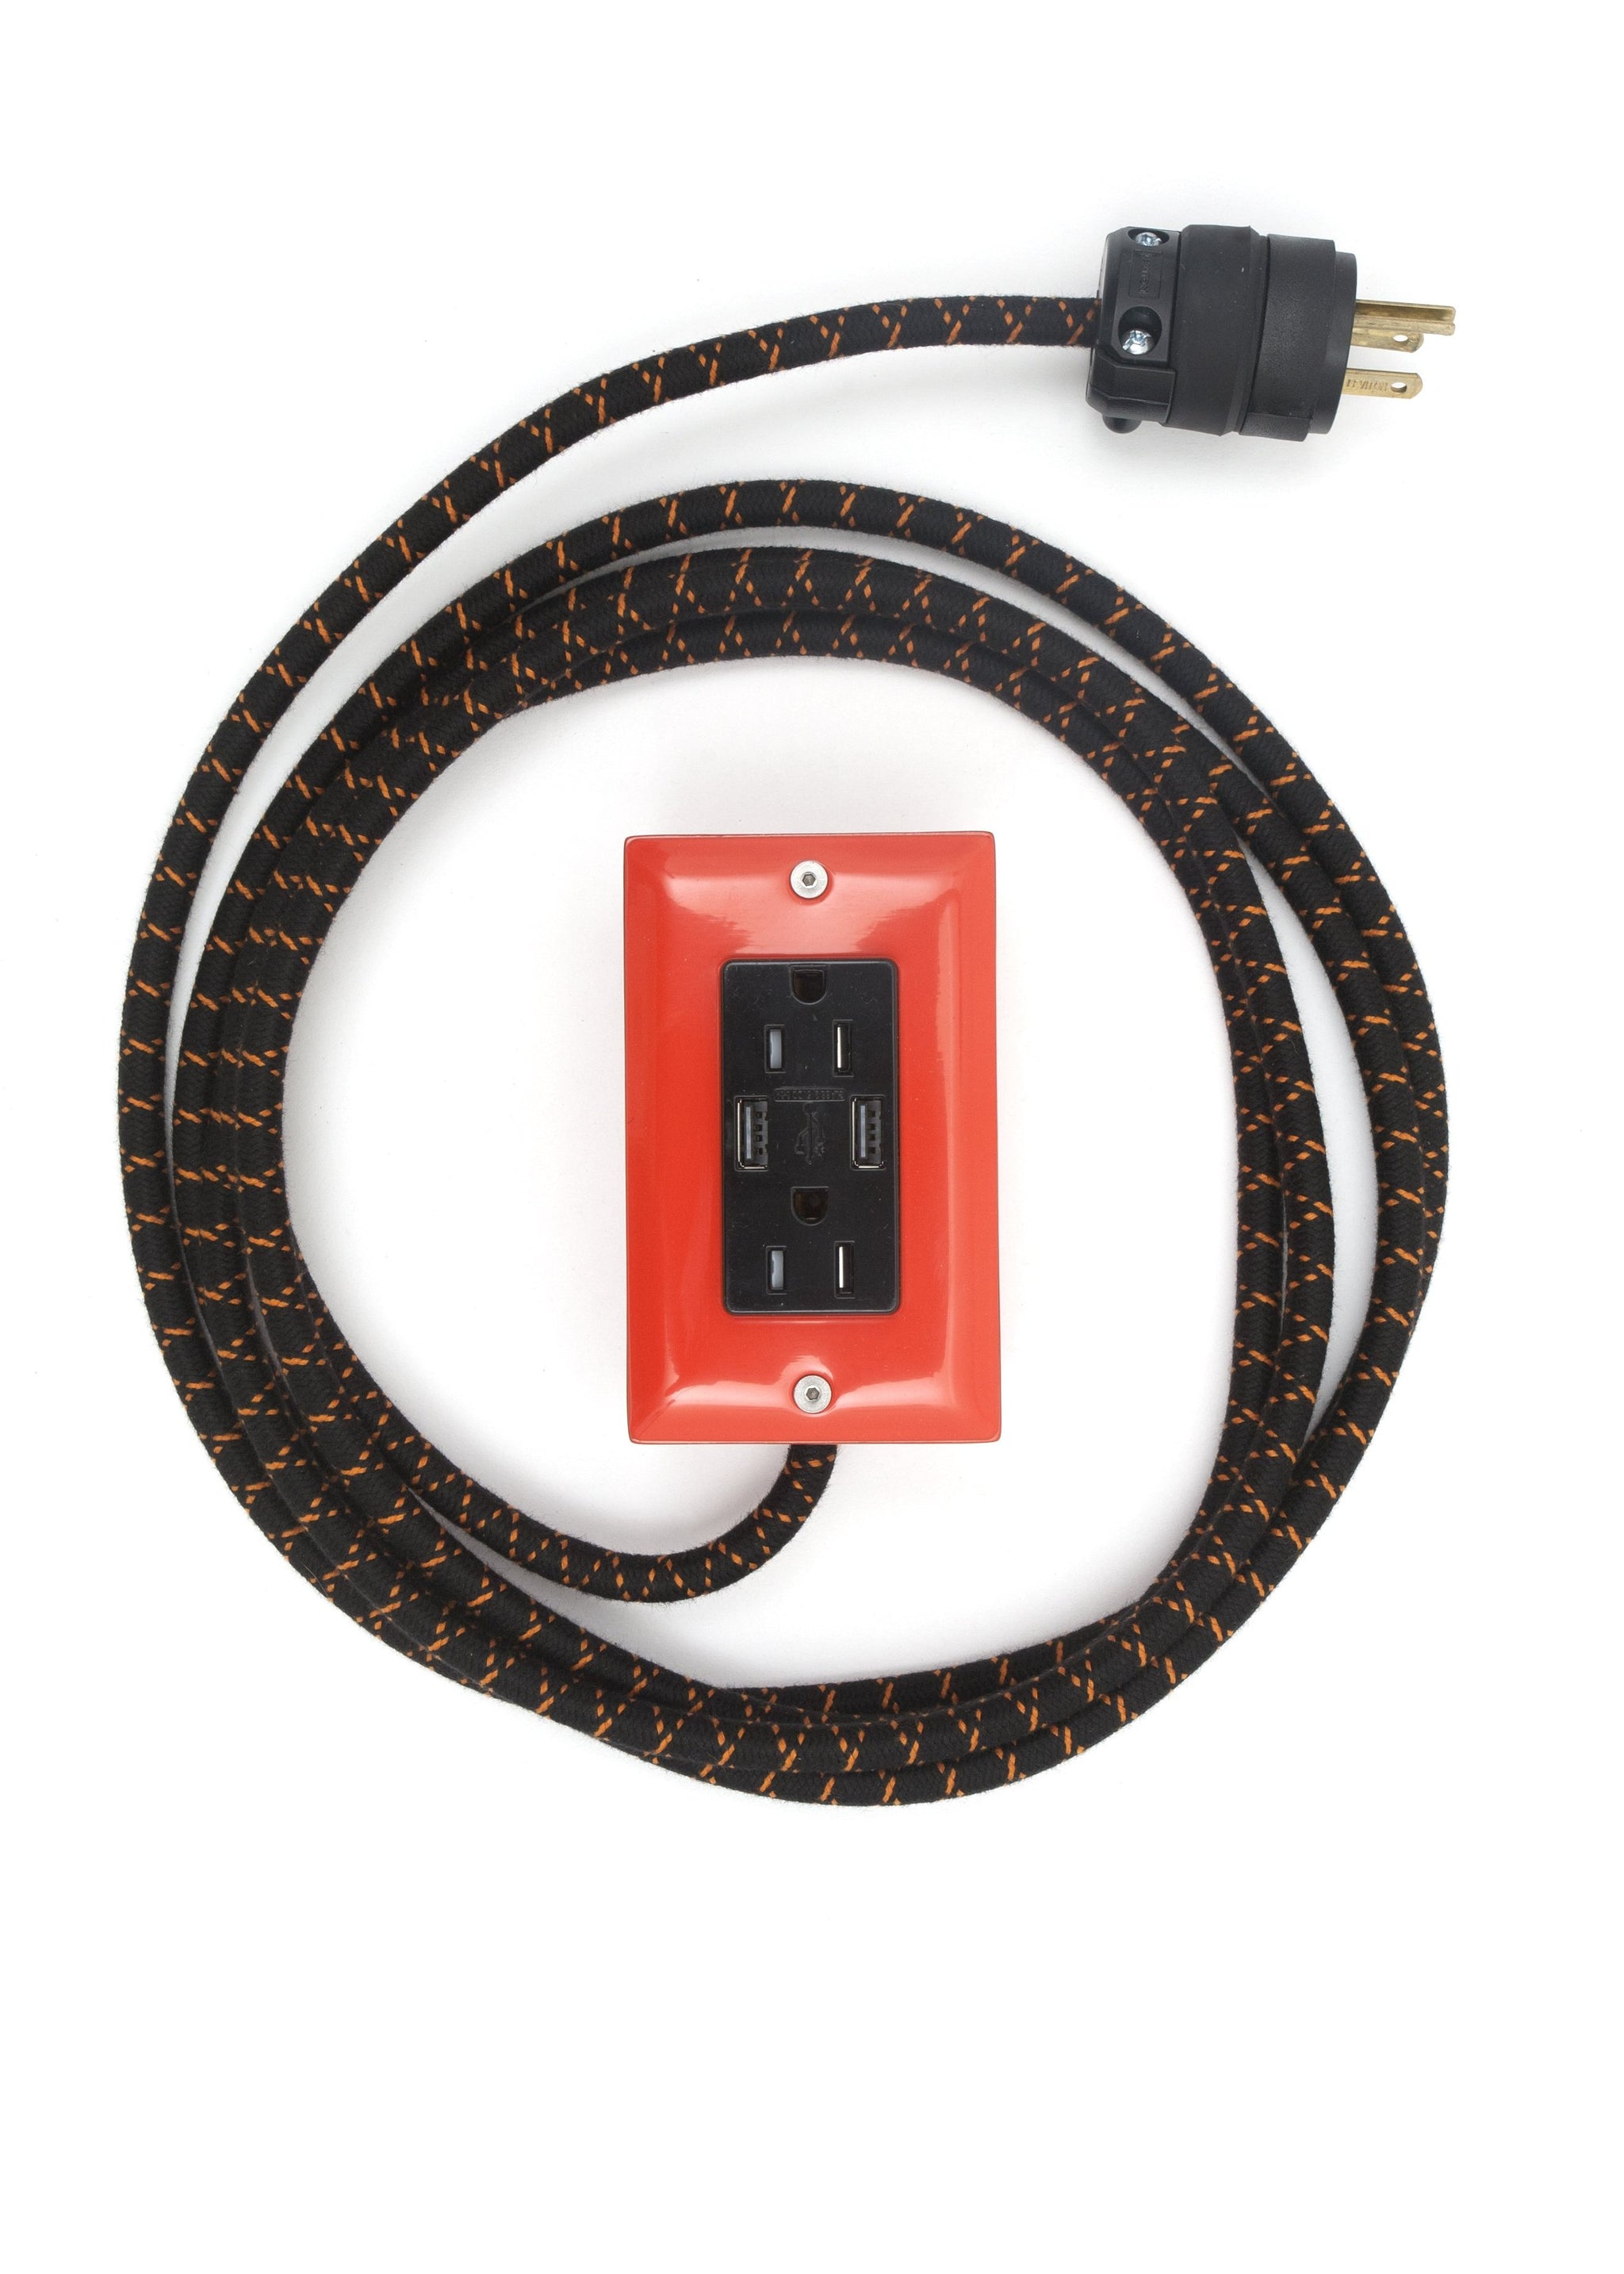 The First Smart Chip Extension Cord - 12' Extō Dual-USB, Dual-Outlet - Pumpkin Orange